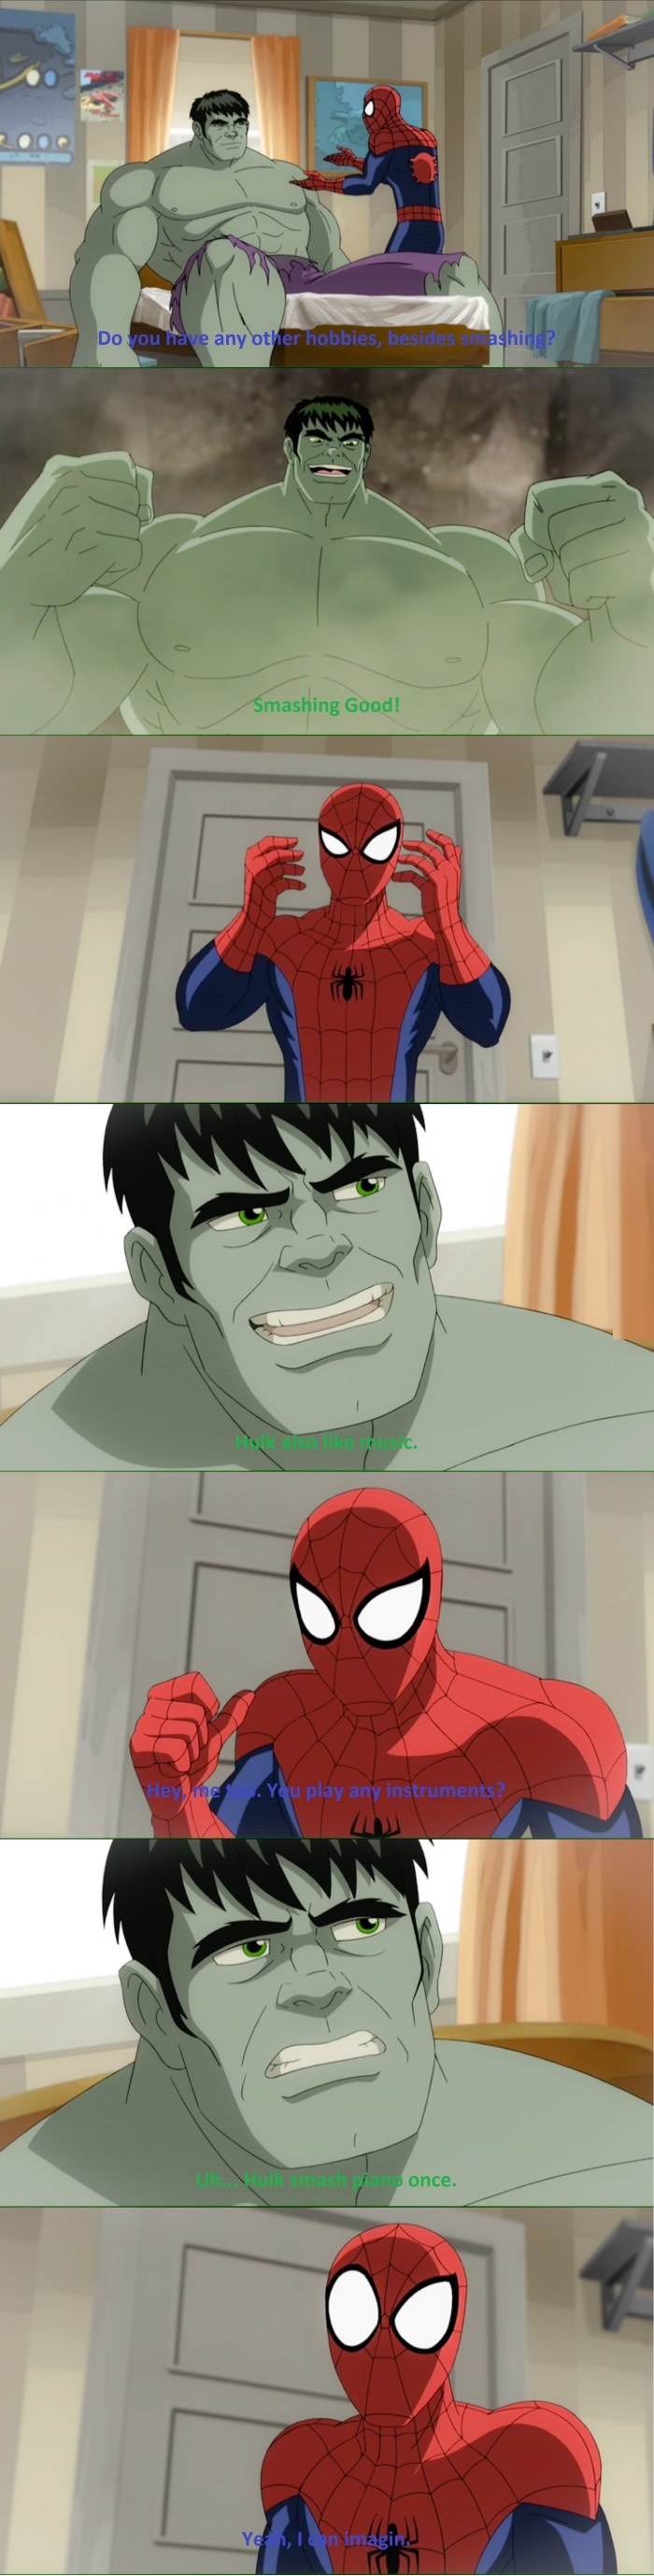 Spider-Man and The Hulk talking about music